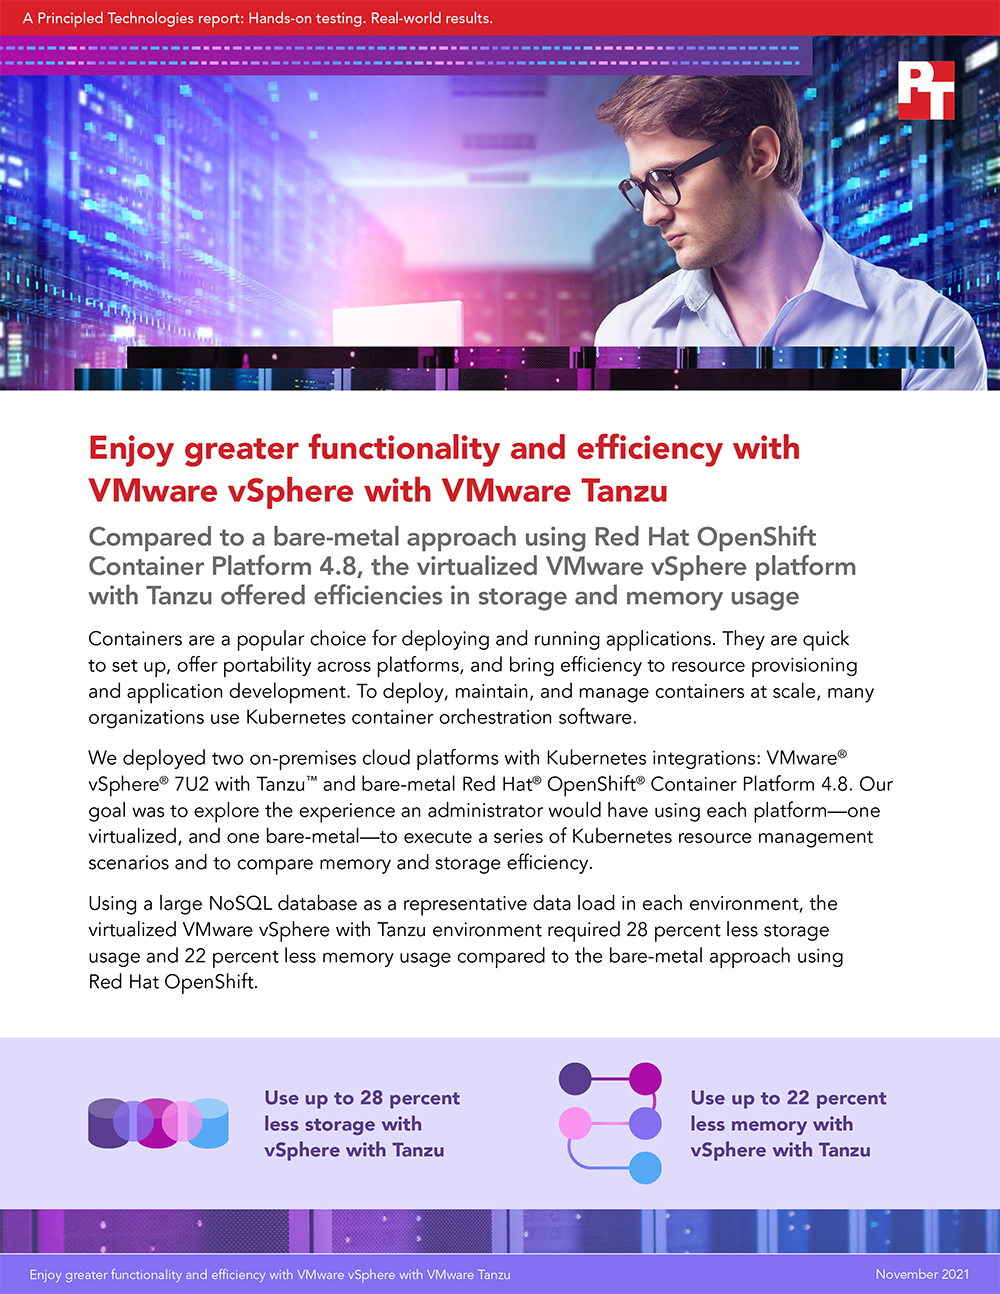 VMware vSphere with VMware Tanzu Delivered Greater Resource Efficiency and Pod Density Than Bare-Metal Red Hat OpenShift Container Platform